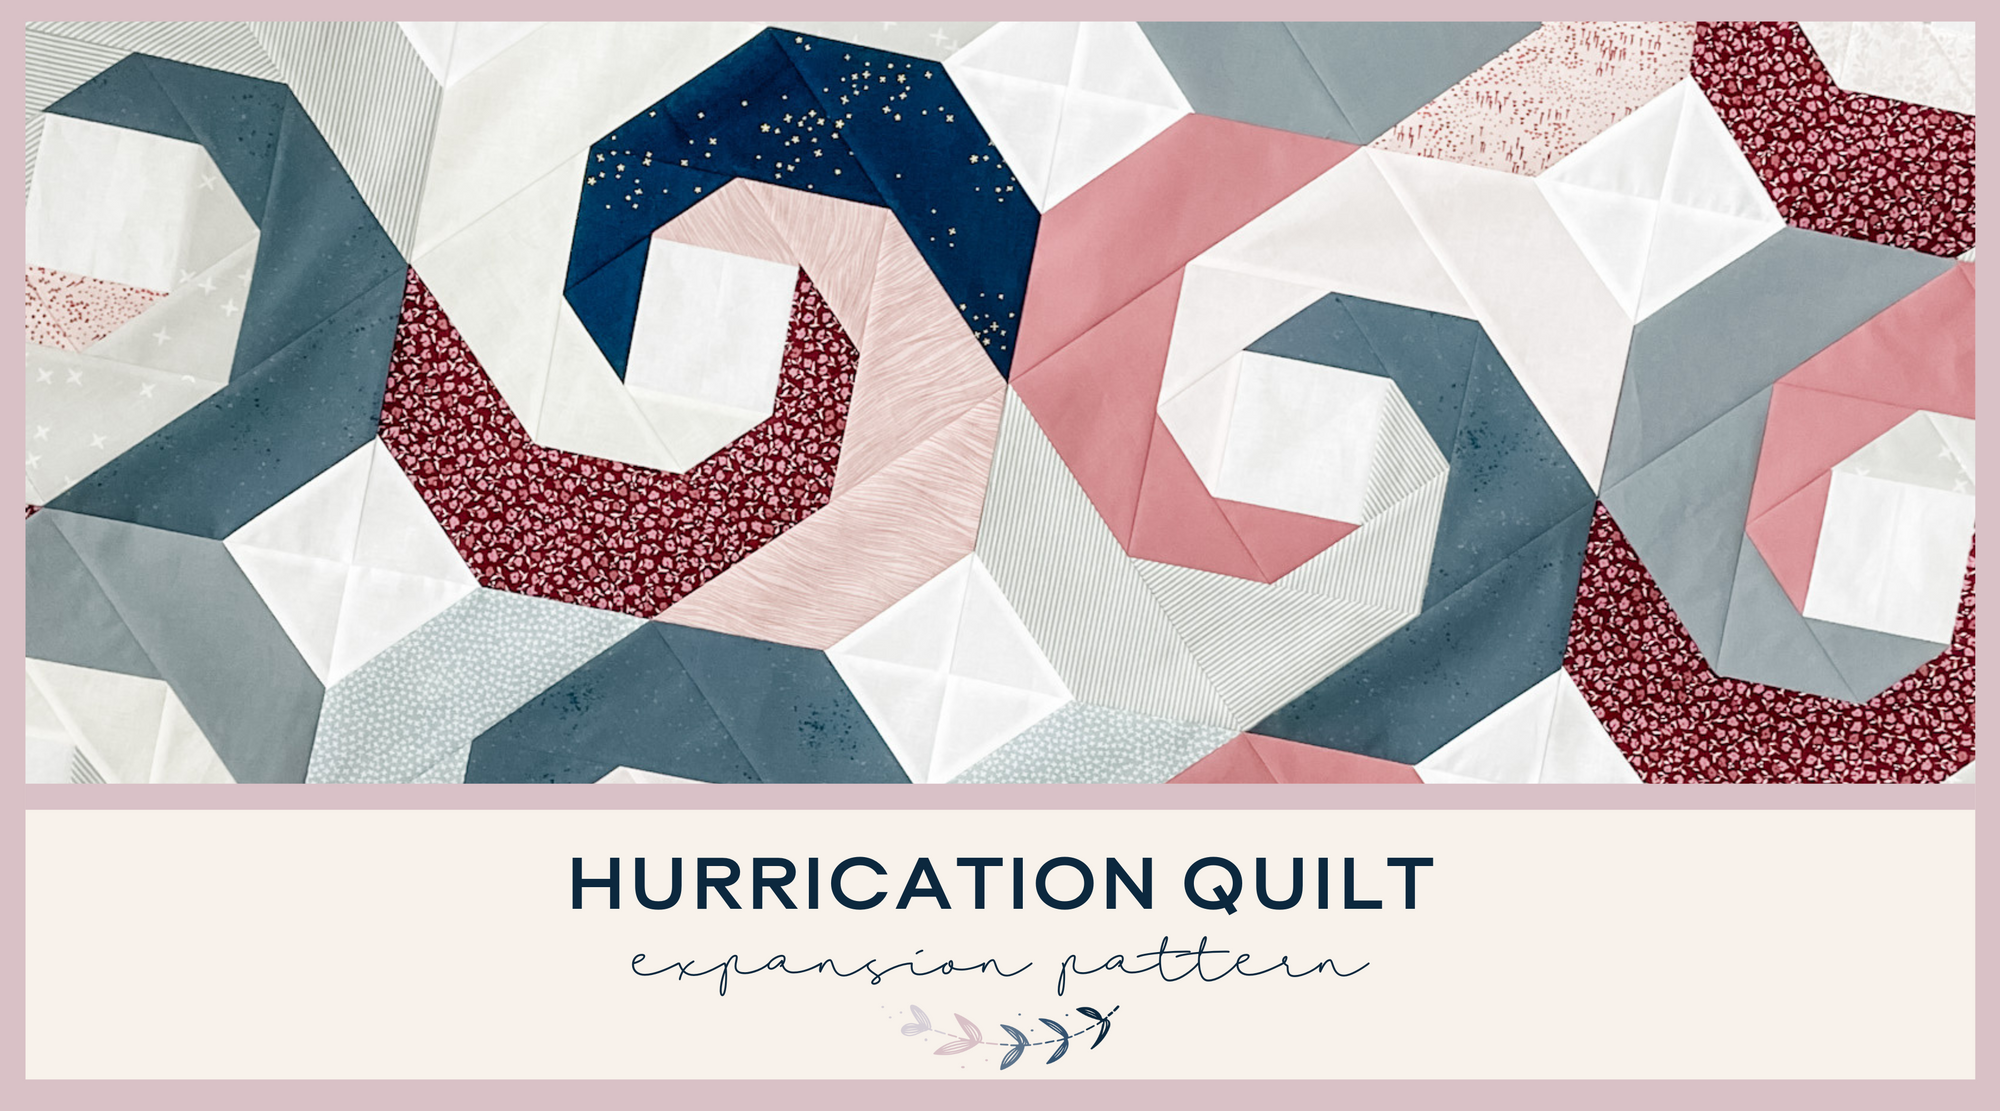 Hurrication Quilt - The Expansion!